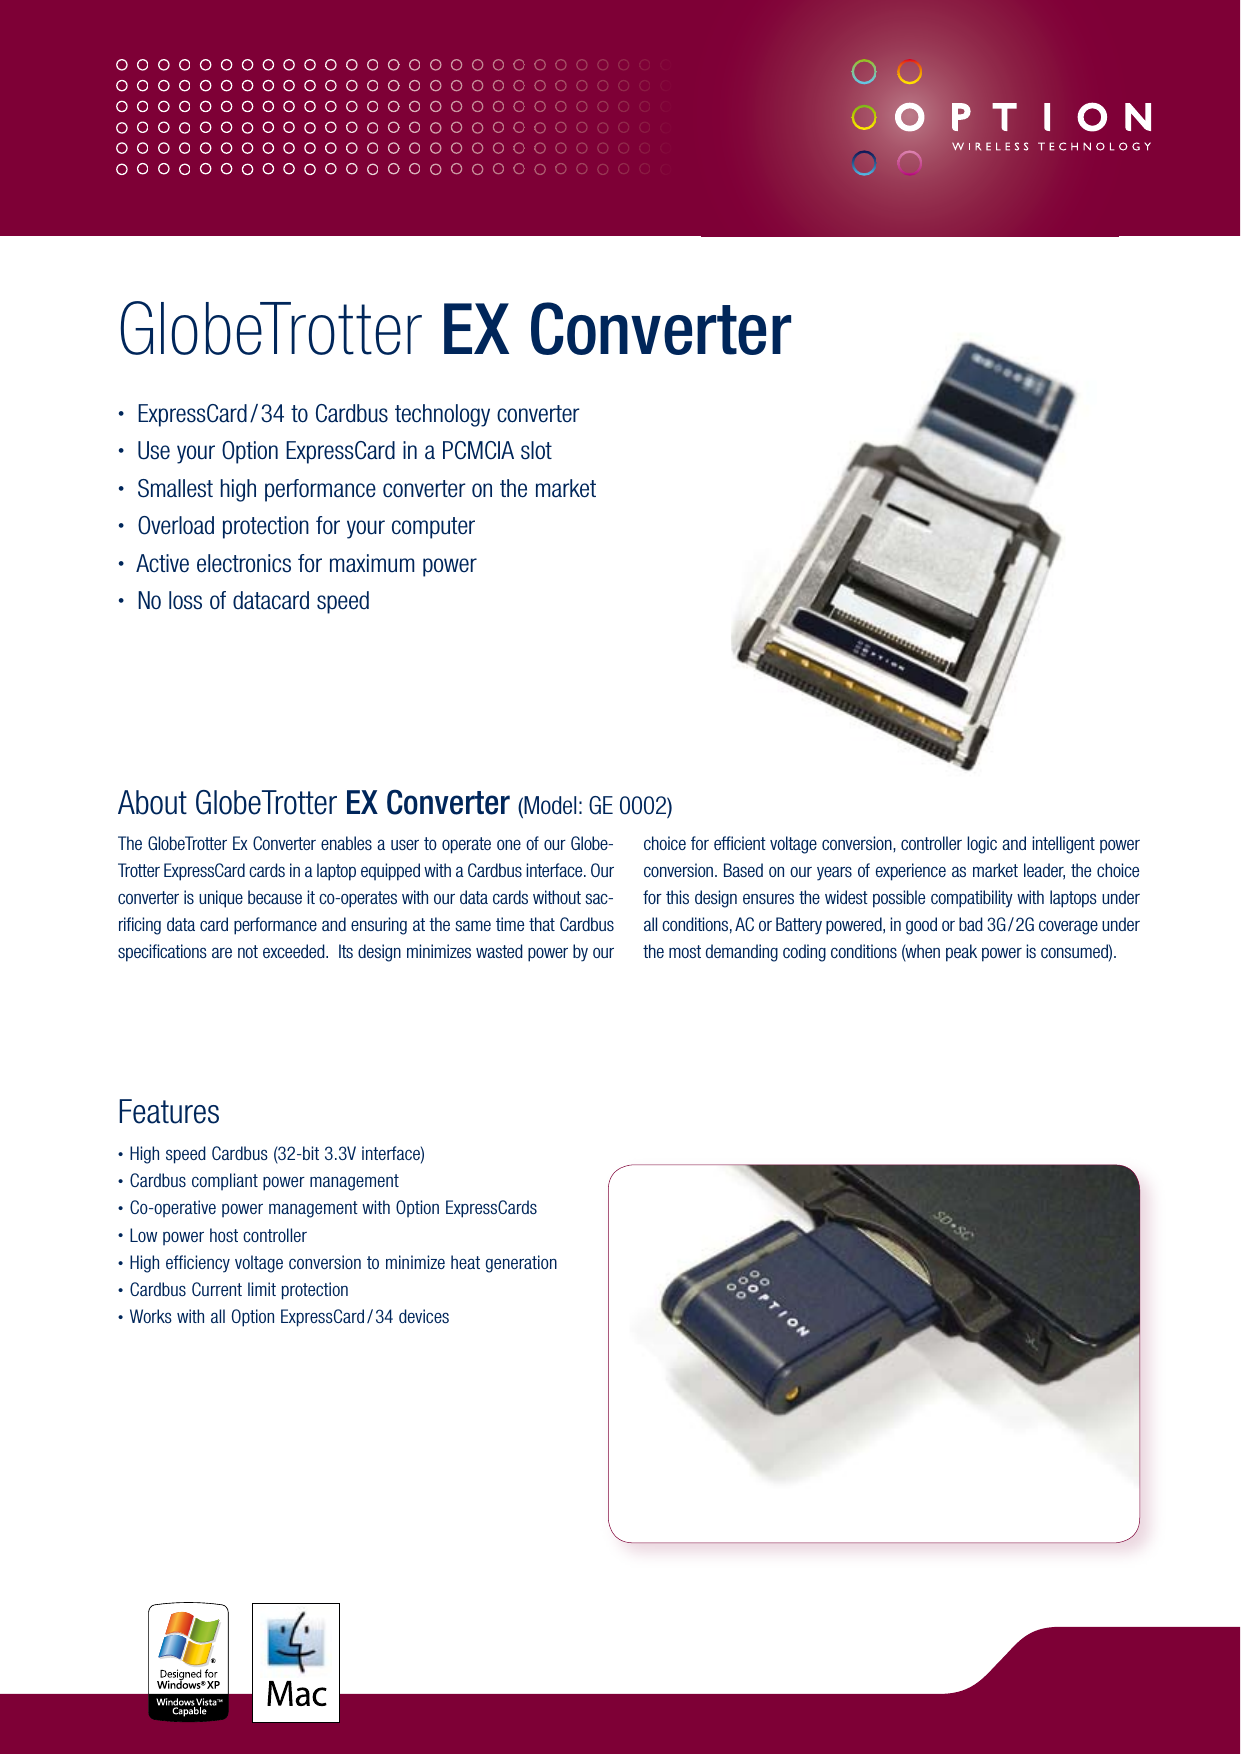 About GlobeTrotter EX Converter (Model: GE 0002)The GlobeTrotter Ex Converter enables a user to operate one of our Globe-Trotter ExpressCard cards in a laptop equipped with a Cardbus interface. Our converter is unique because it co-operates with our data cards without sac-rificing data card performance and ensuring at the same time that Cardbus specifications are not exceeded.  Its design minimizes wasted power by our choice for efficient voltage conversion, controller logic and intelligent power conversion. Based on our years of experience as market leader, the choice for this design ensures the widest possible compatibility with laptops under all conditions, AC or Battery powered, in good or bad 3G / 2G coverage under the most demanding coding conditions (when peak power is consumed).Features• High speed Cardbus (32-bit 3.3V interface)• Cardbus compliant power management• Co-operative power management with Option ExpressCards• Low power host controller• High efficiency voltage conversion to minimize heat generation• Cardbus Current limit protection• Works with all Option ExpressCard / 34 devicesGlobeTrotter EX Converter•  ExpressCard / 34 to Cardbus technology converter•  Use your Option ExpressCard in a PCMCIA slot•  Smallest high performance converter on the market•  Overload protection for your computer•  Active electronics for maximum power•  No loss of datacard speed